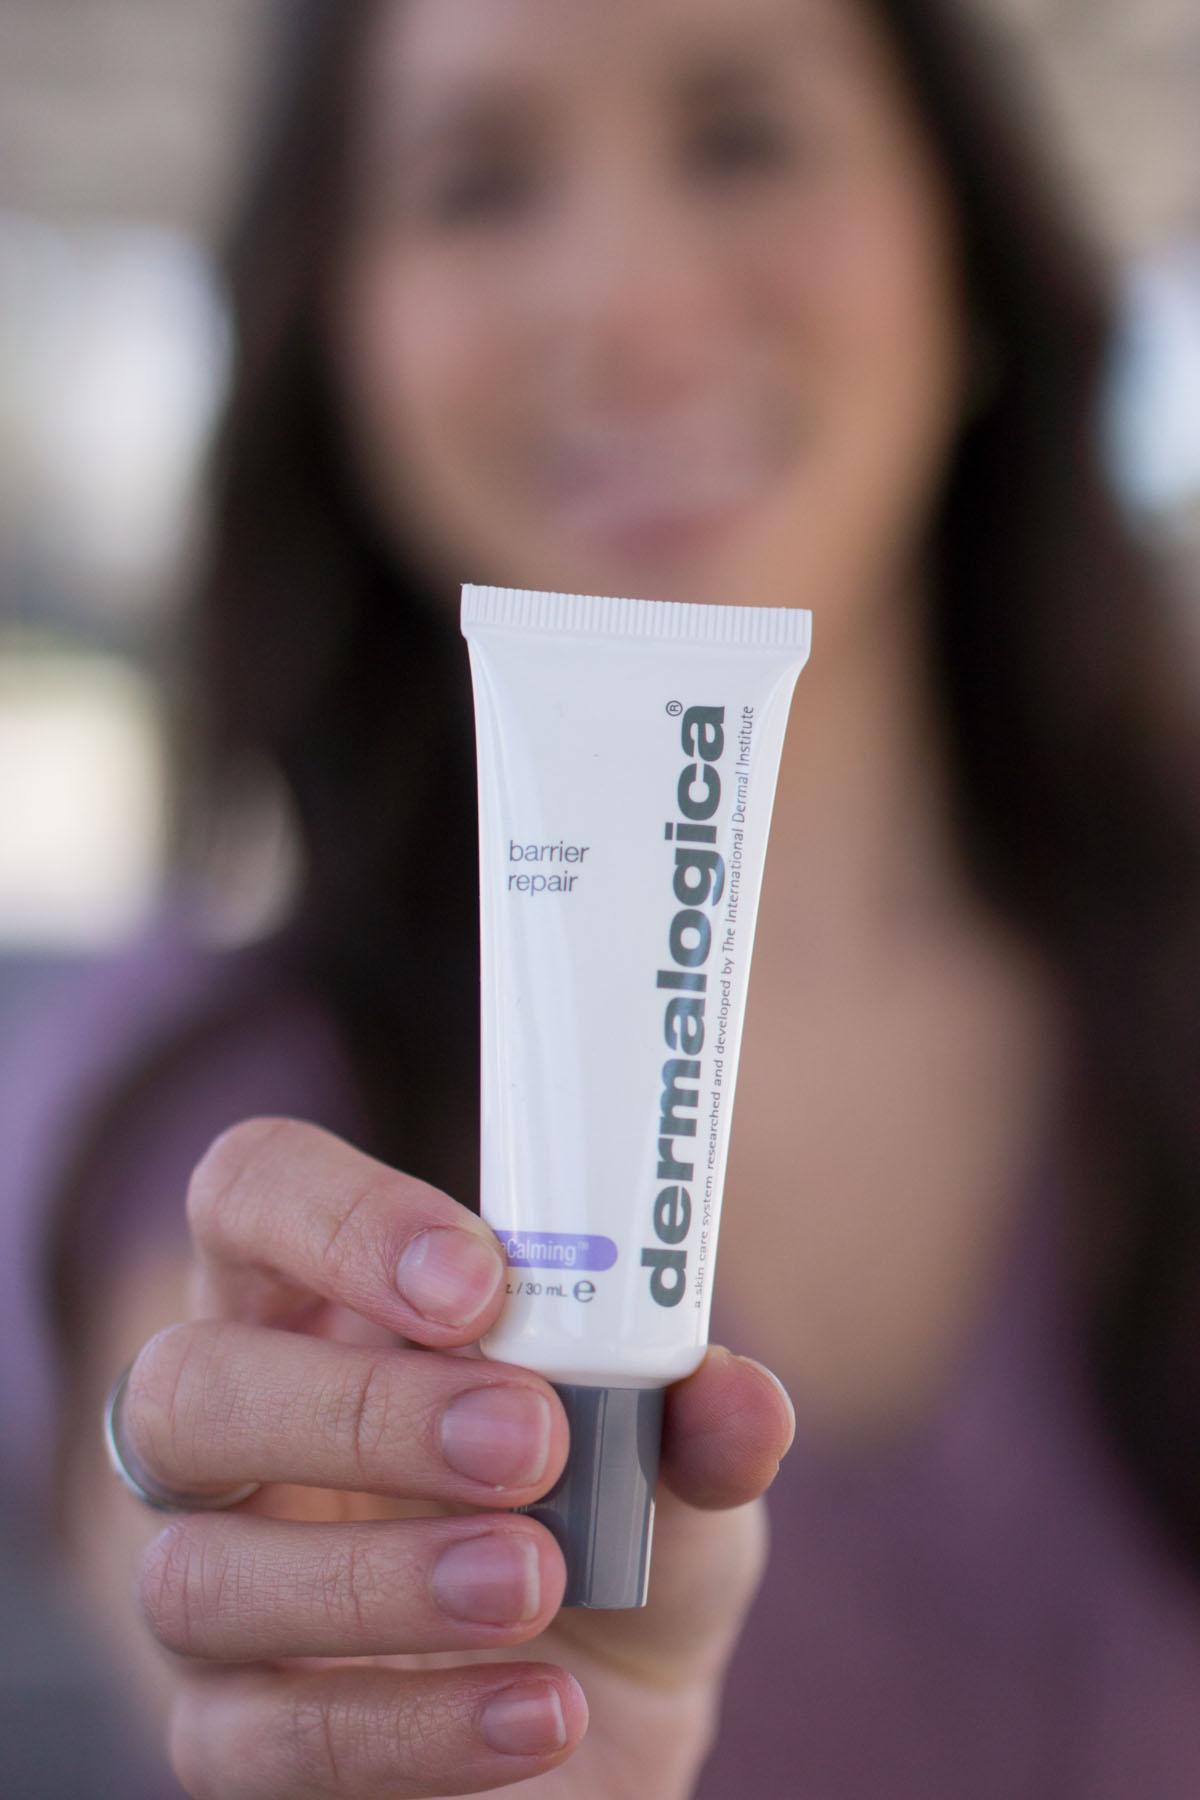 Dermalogica Pure Light | Barrier Repair Review | Skin Smoothing Cream review | Solar Defense Booster | Best skincare products | best spf moisturizers facial creams | summer skin health 